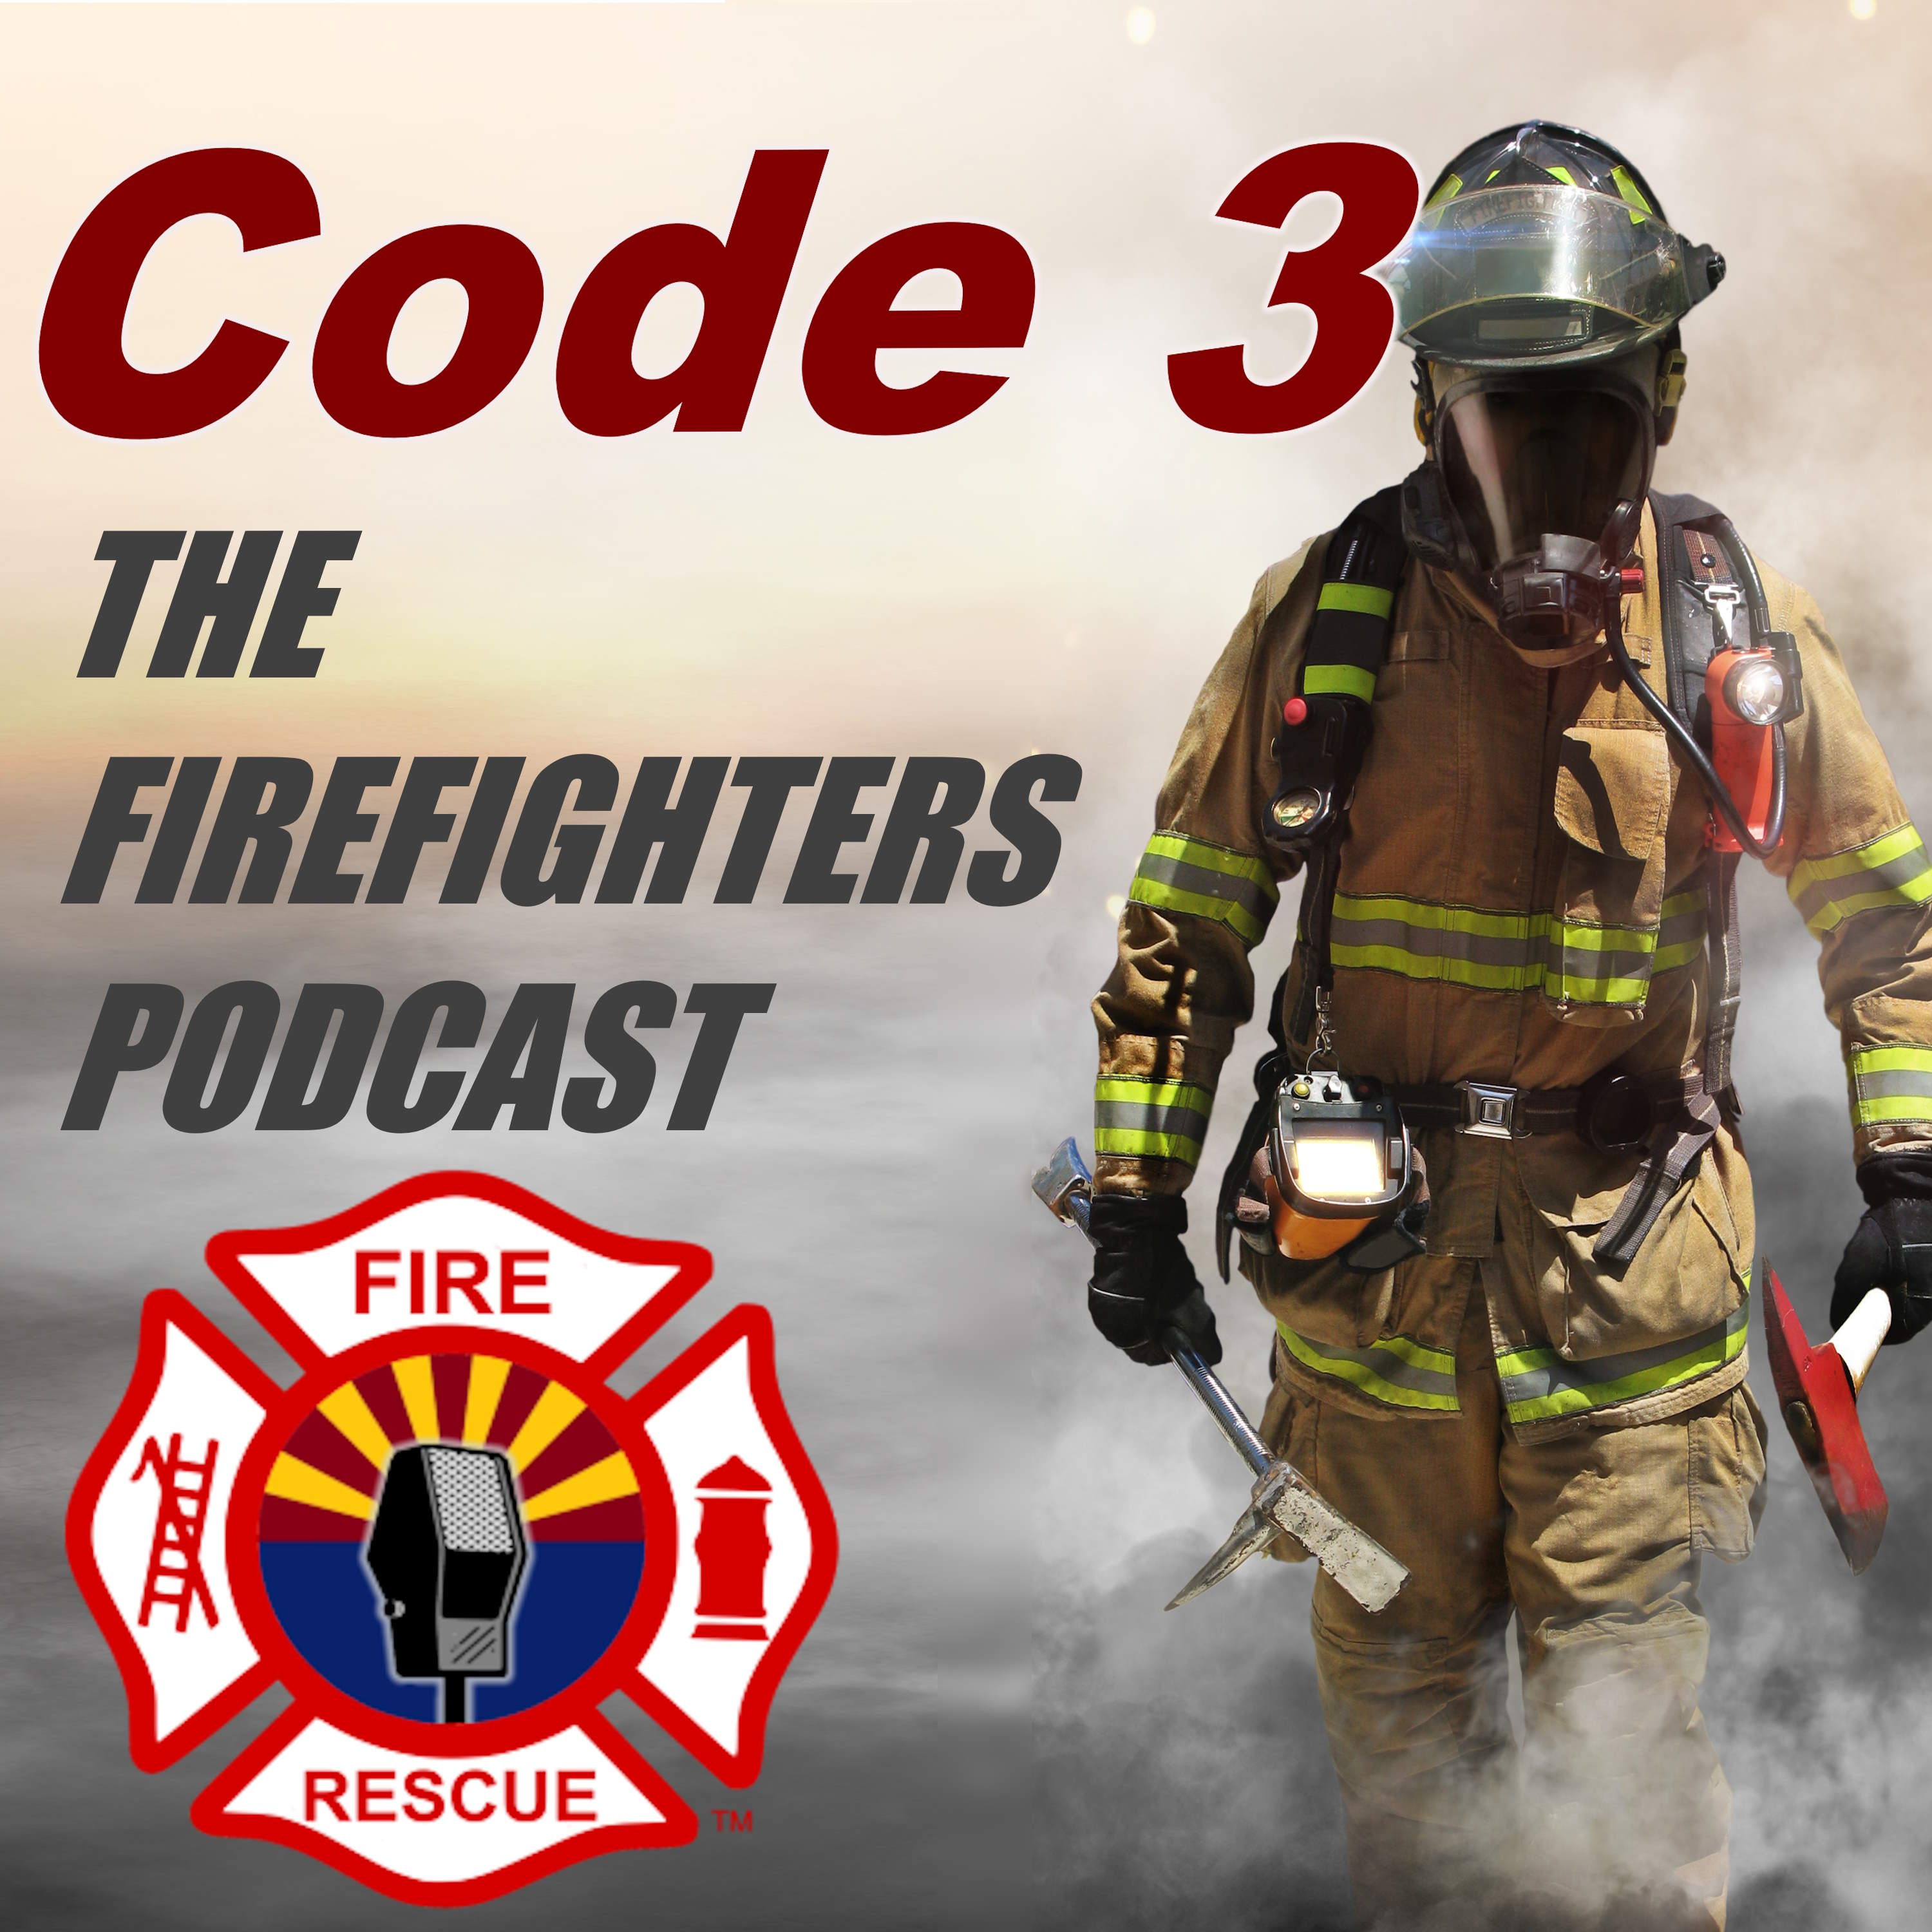 Code 3 - The Firefighters Podcast